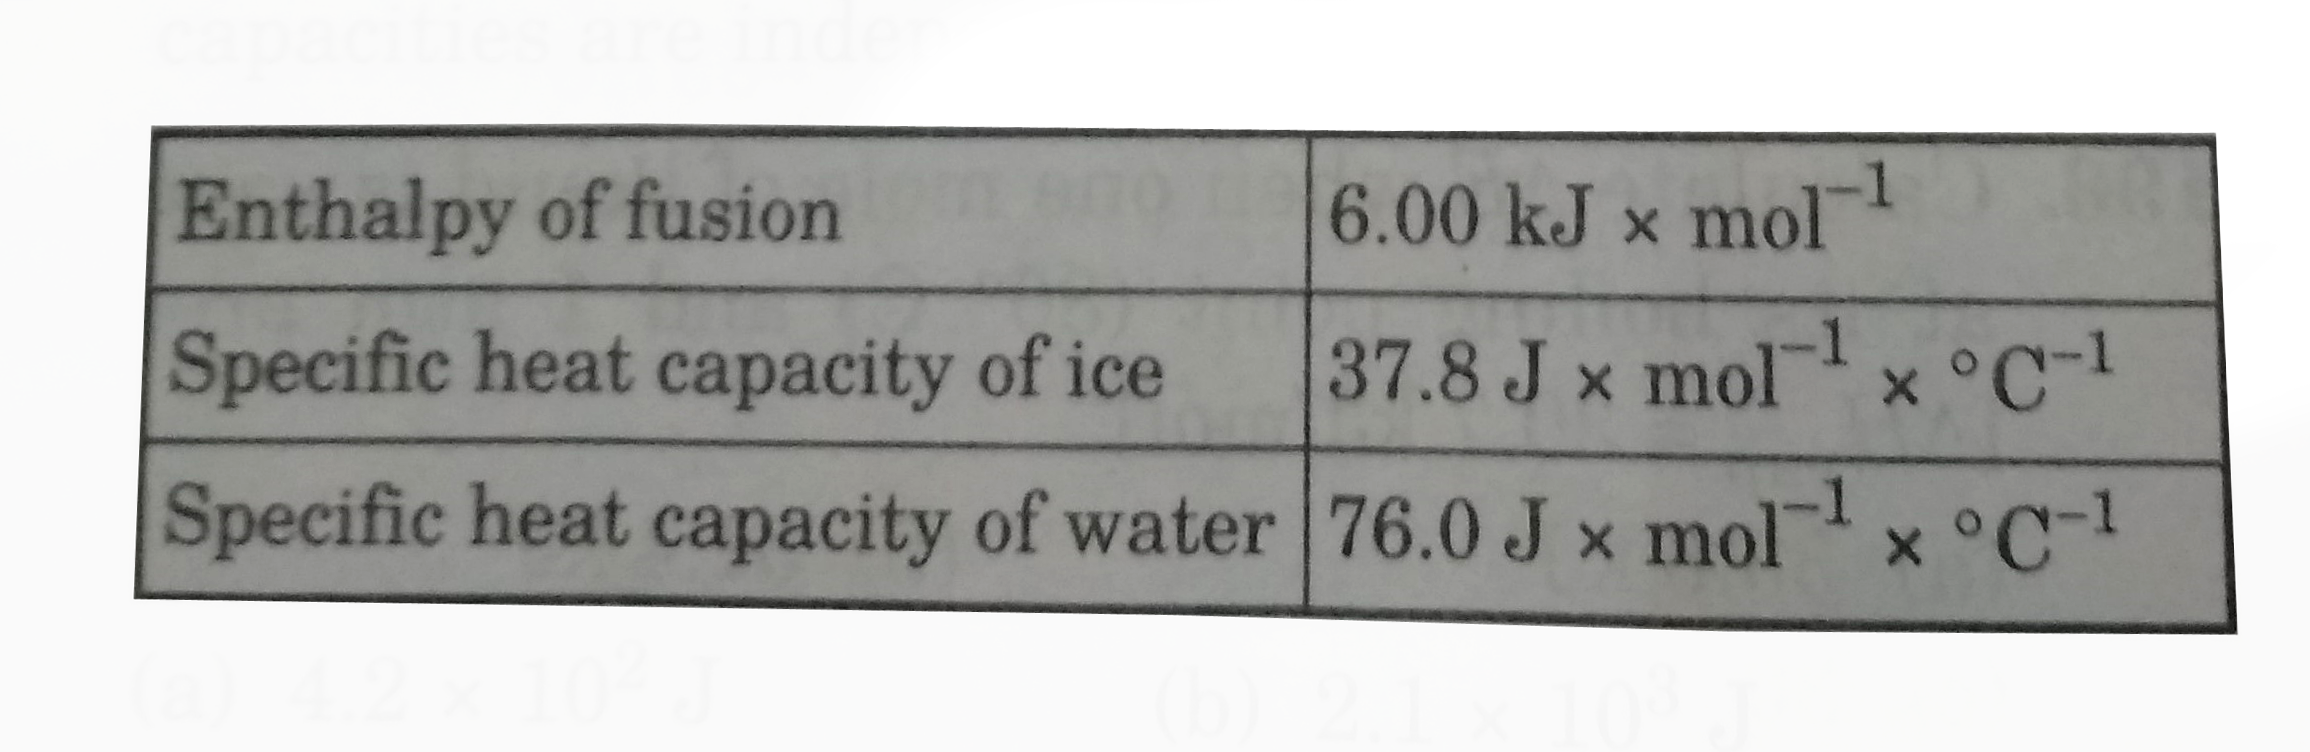 How much heat is reuired to convert 5.0 g of ice at -10.0^(@) C to liquid water at 15.0^(@) C ? (Assume heart capacities are indendent o ftemperature.)